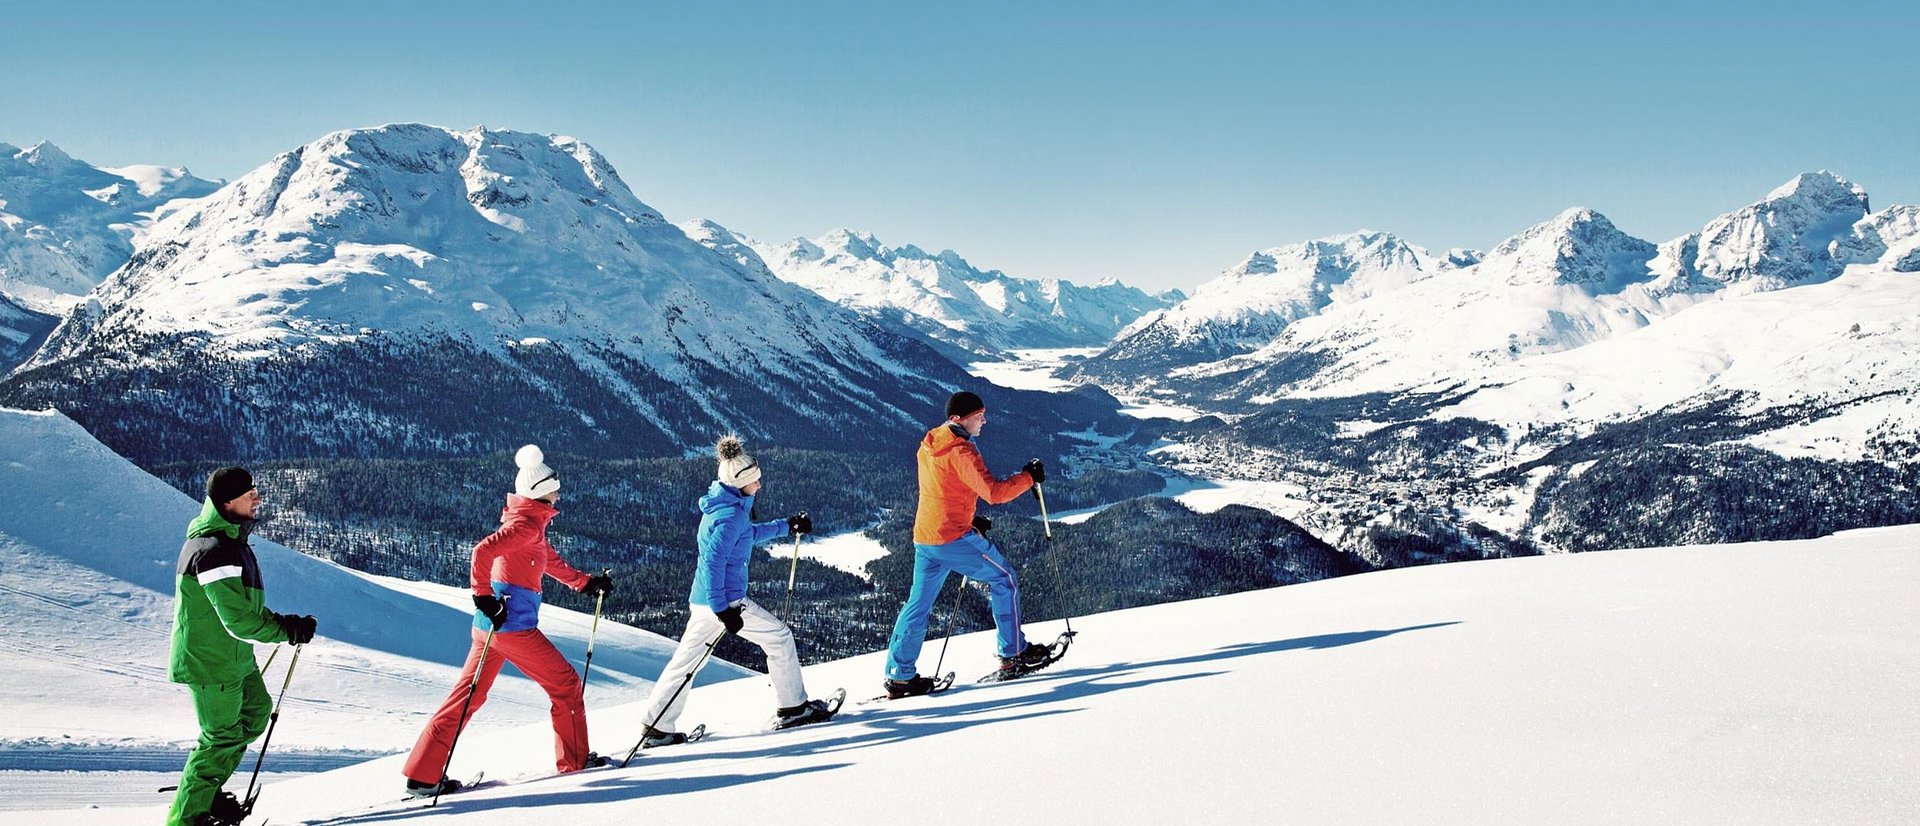 Book your best cross-country skiing experience now at an unbeatable price